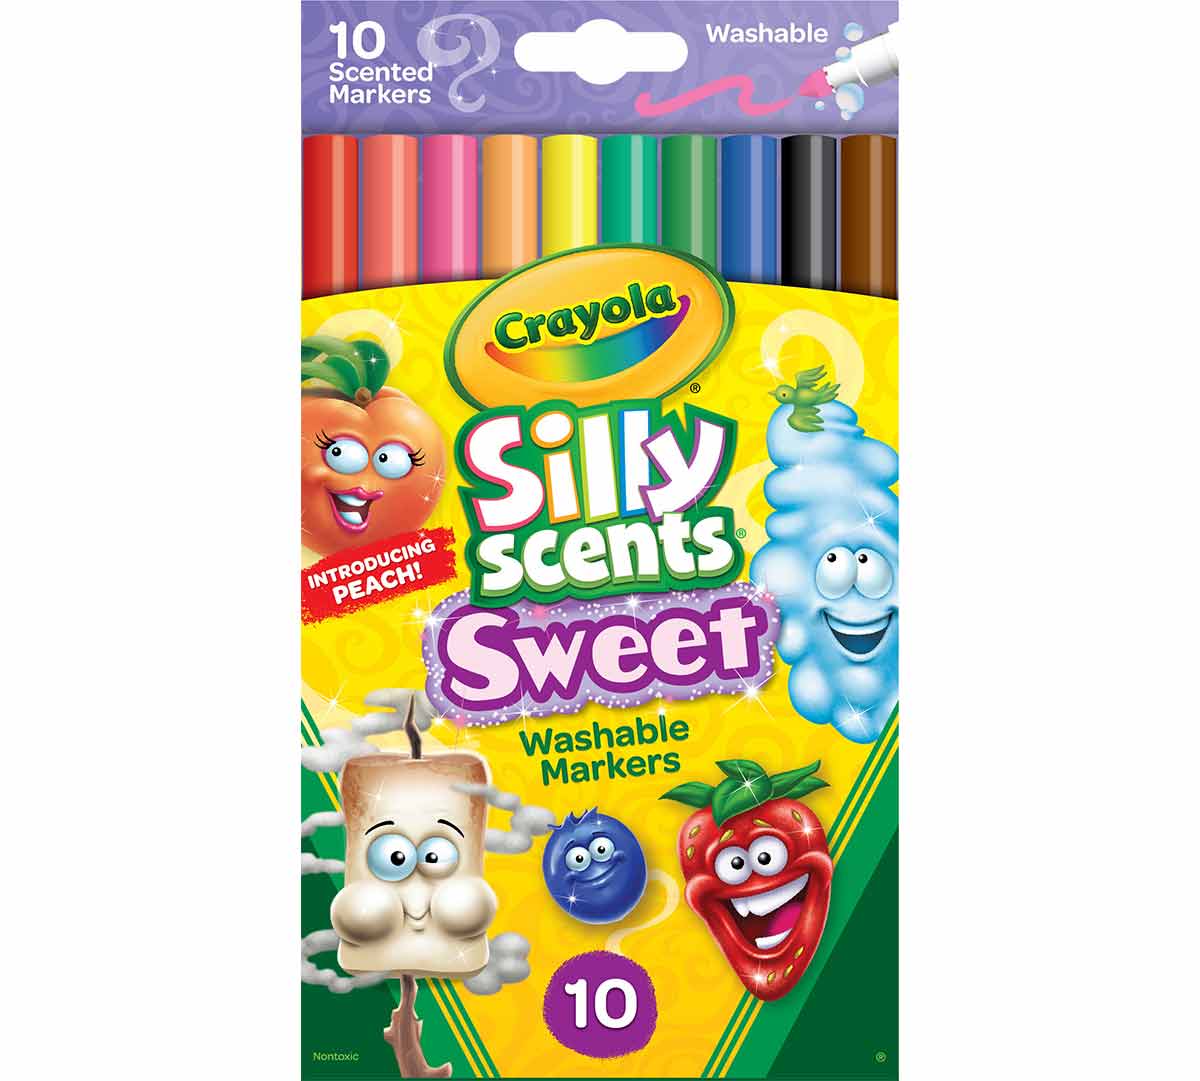 https://shop.crayola.com/on/demandware.static/-/Sites-crayola-storefront/default/dw72978498/images/58-5071-0-205_10ct_Silly-Scents_Slim-Markers_Peach_F-R.jpg